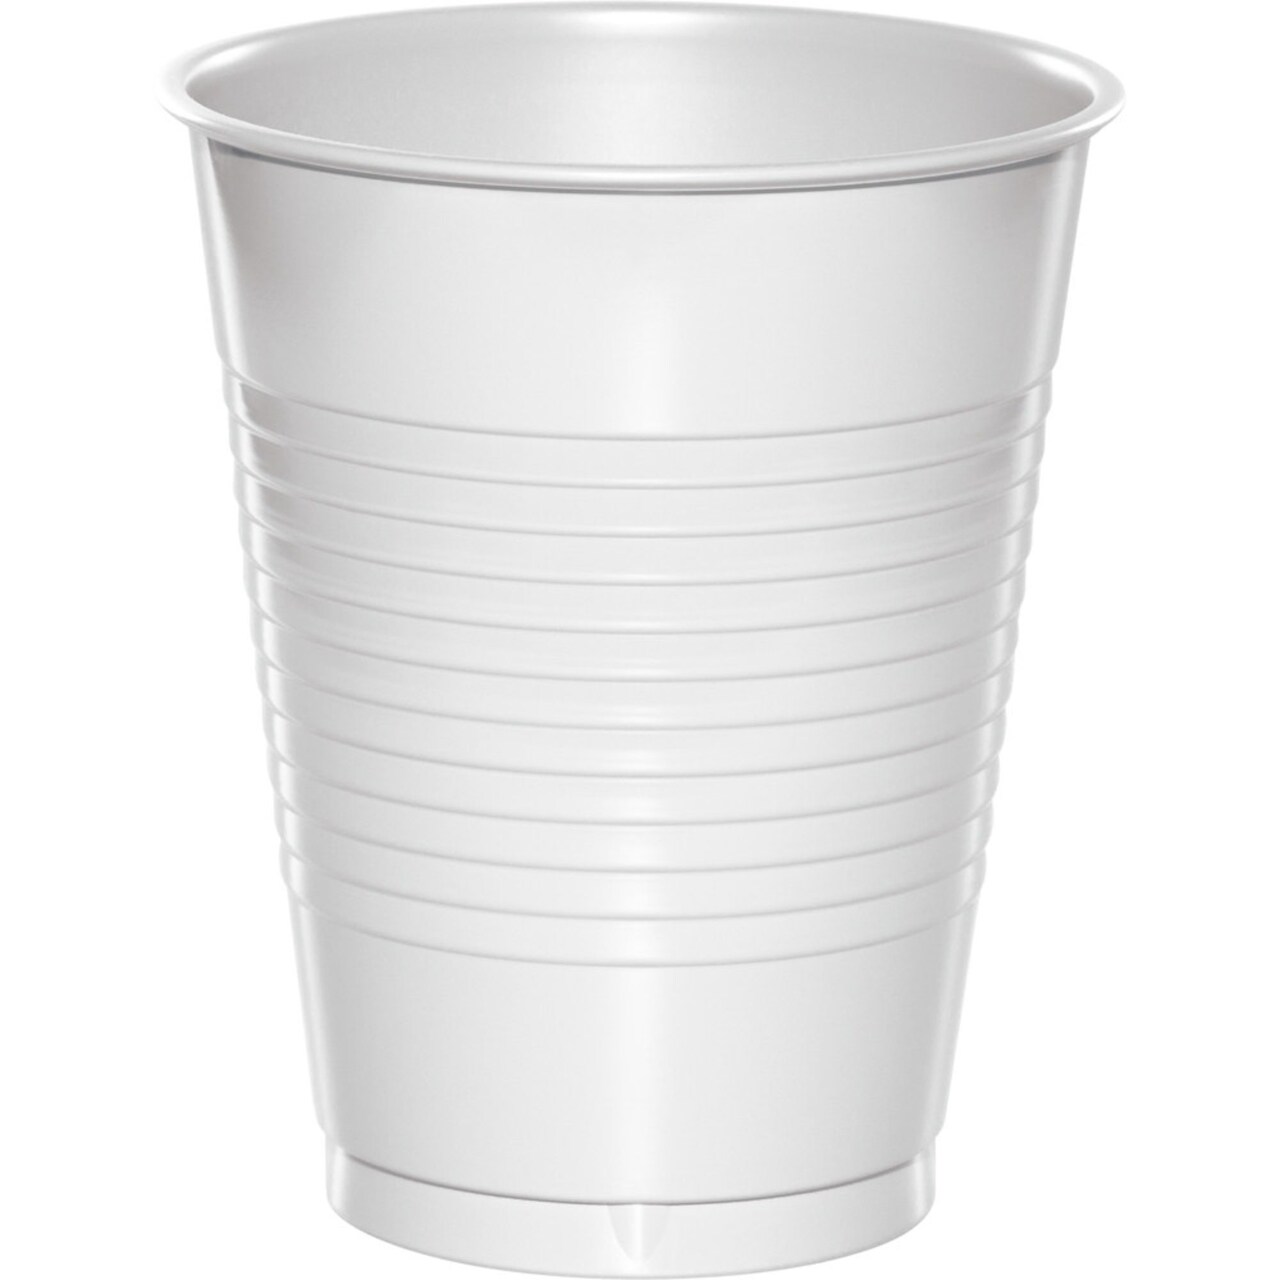 Party Central Club Pack of 240 White Disposable Drinking Party Tumbler Cups 16 oz.